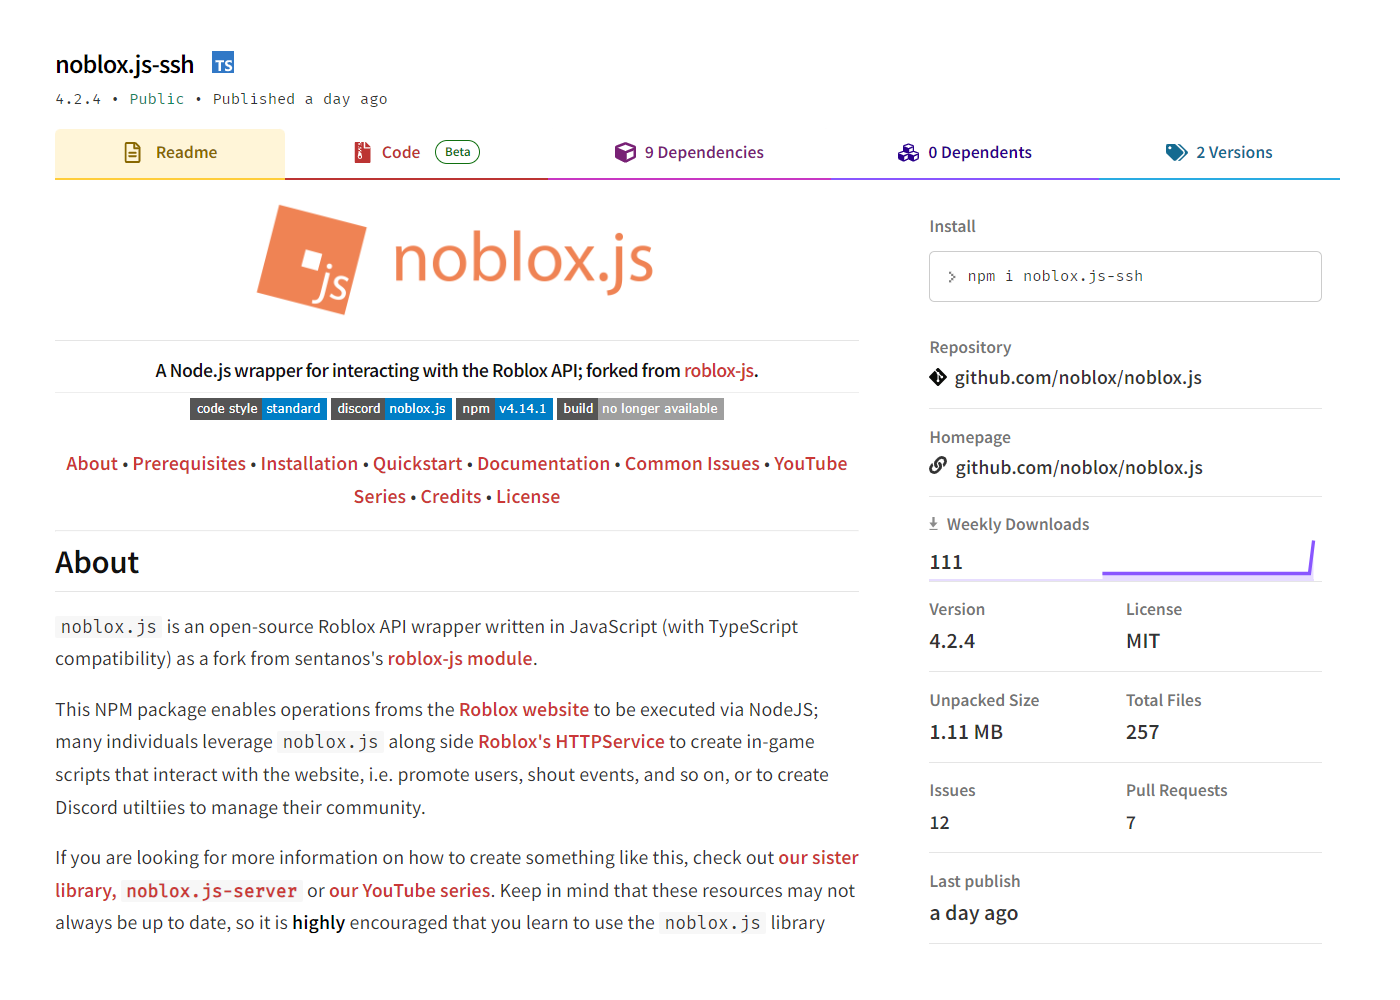 Fake Roblox packages target npm with Luna Grabber info-stealing